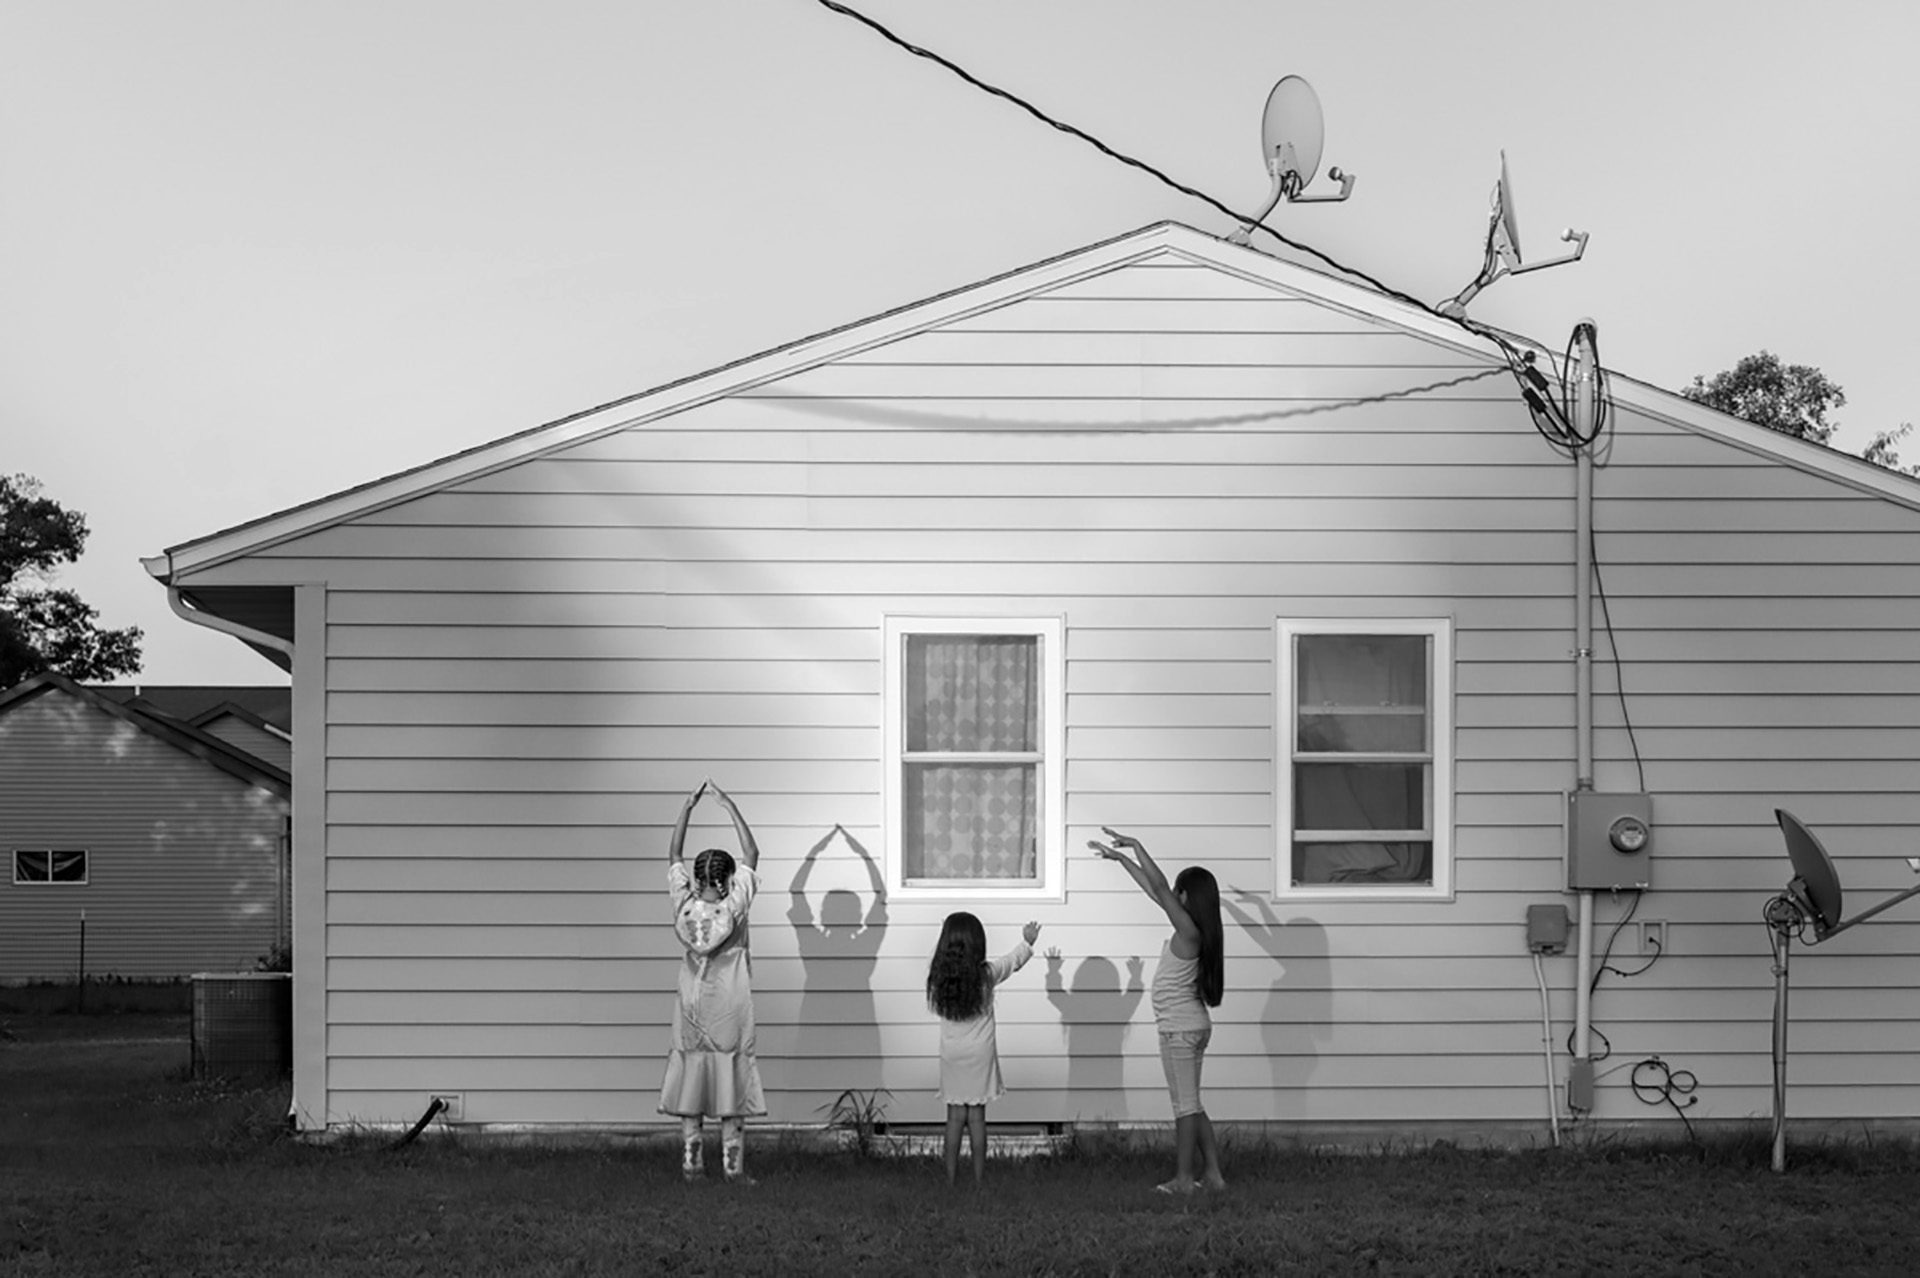 Photograph by Alessandra Sanguinetti of three girls facing a wood panelled house posing with their arms in the air and casting shadows onto the side of the building